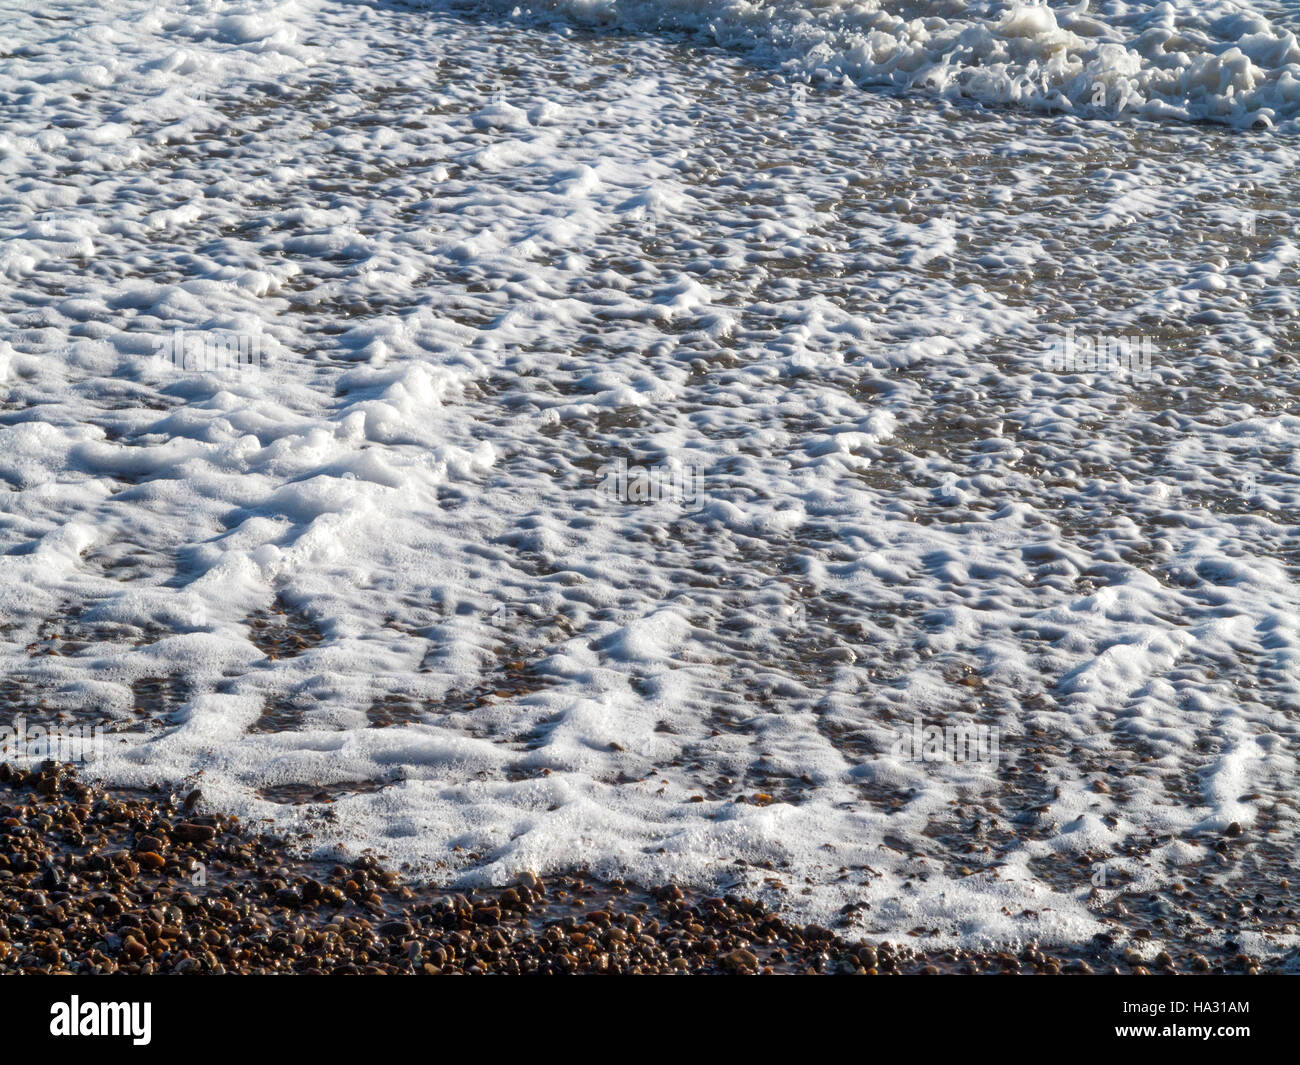 Close up of foam and froth on a pebble beach during rough seas Stock Photo